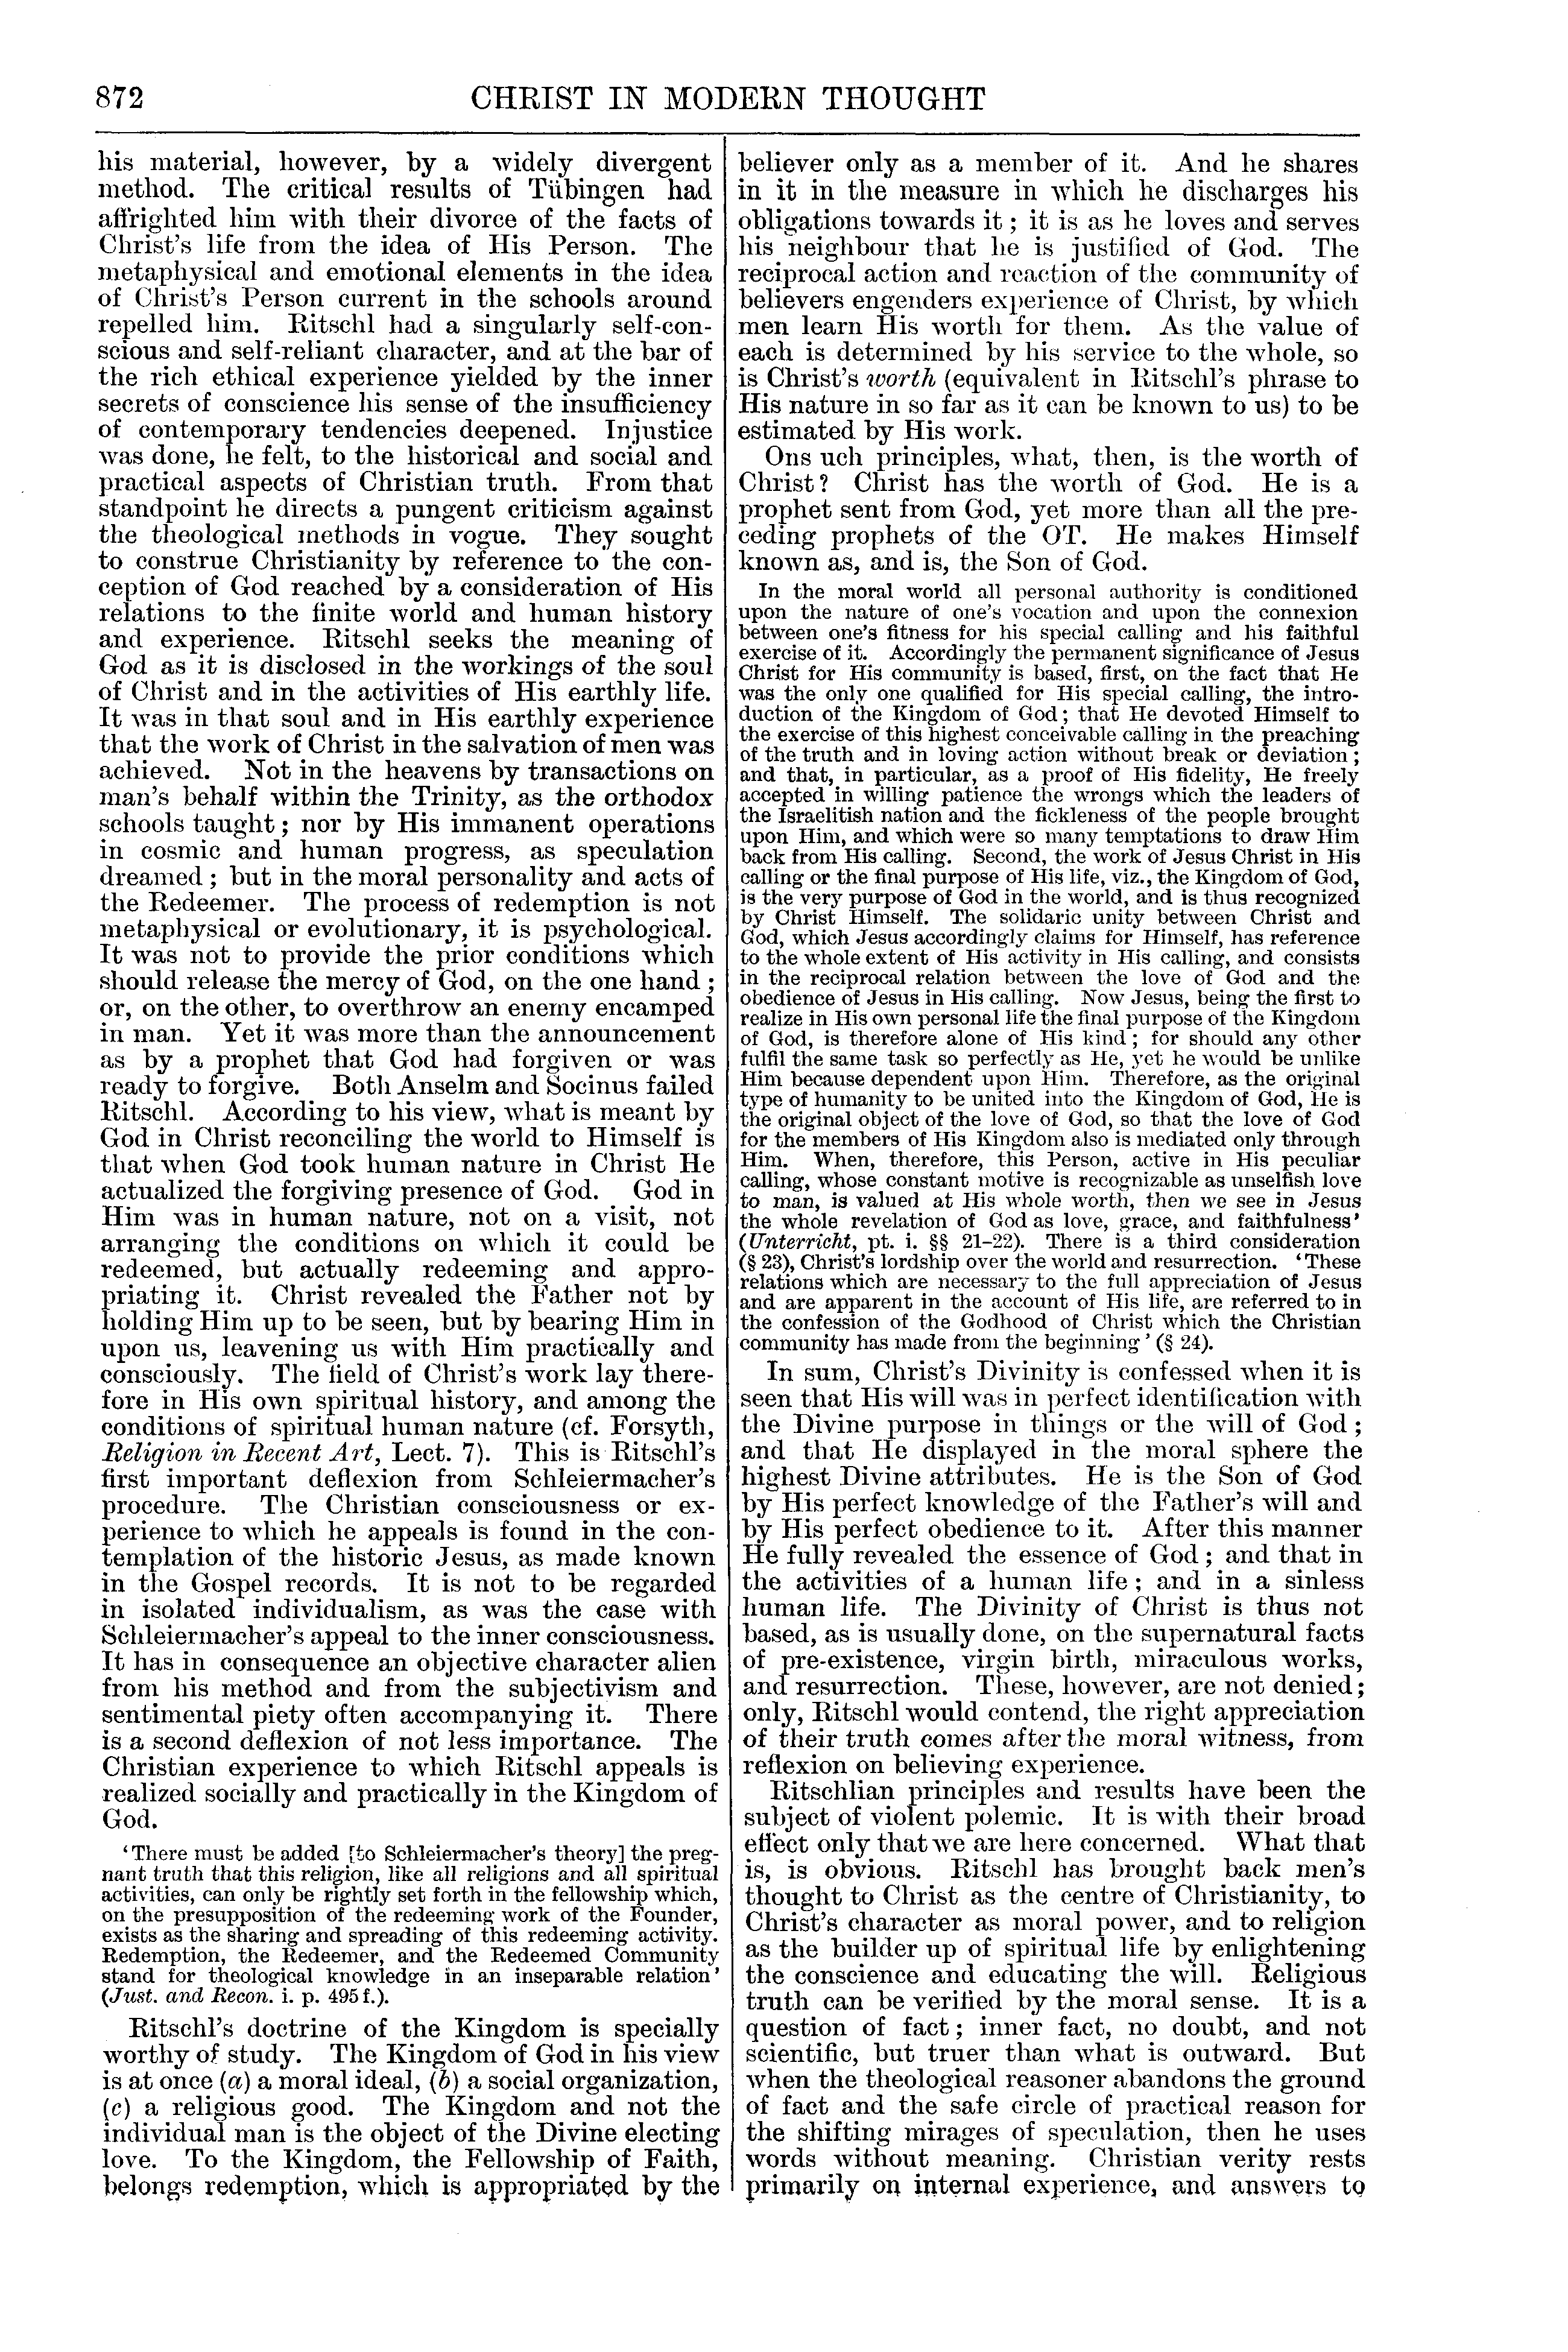 Image of page 872